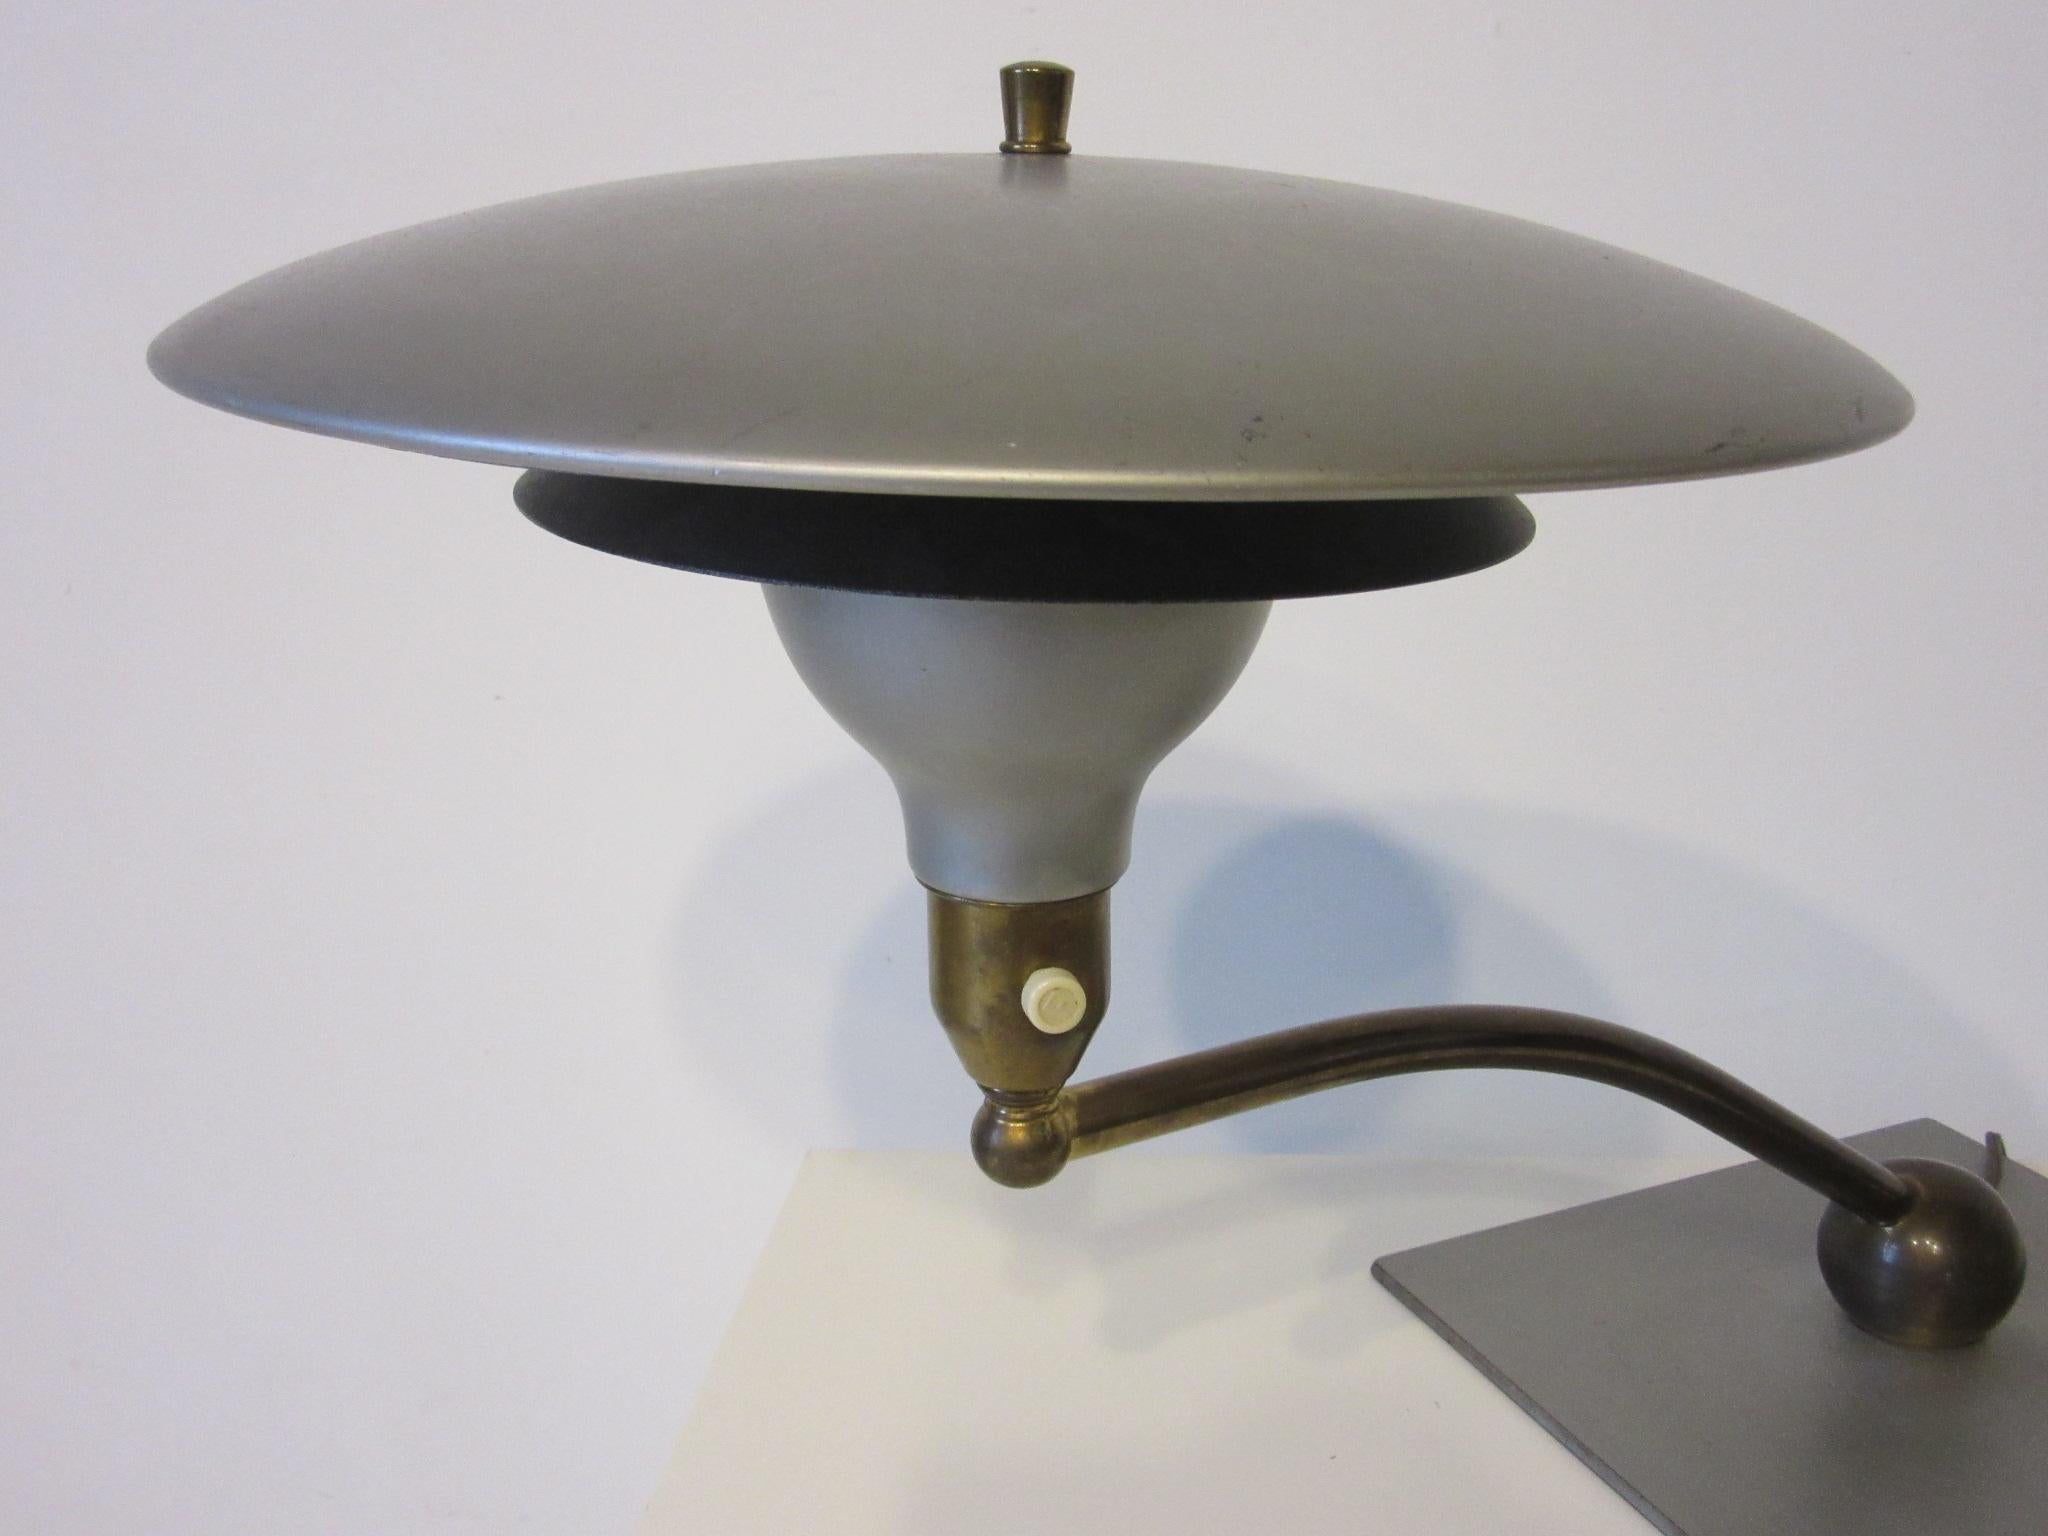 A machine aged desk lamp with painted metal shades and brass swing arm mounted on a brass ball and plate. Retains the original labels the sight light lamp and was manufactured by the M.G. Wheeler Company.